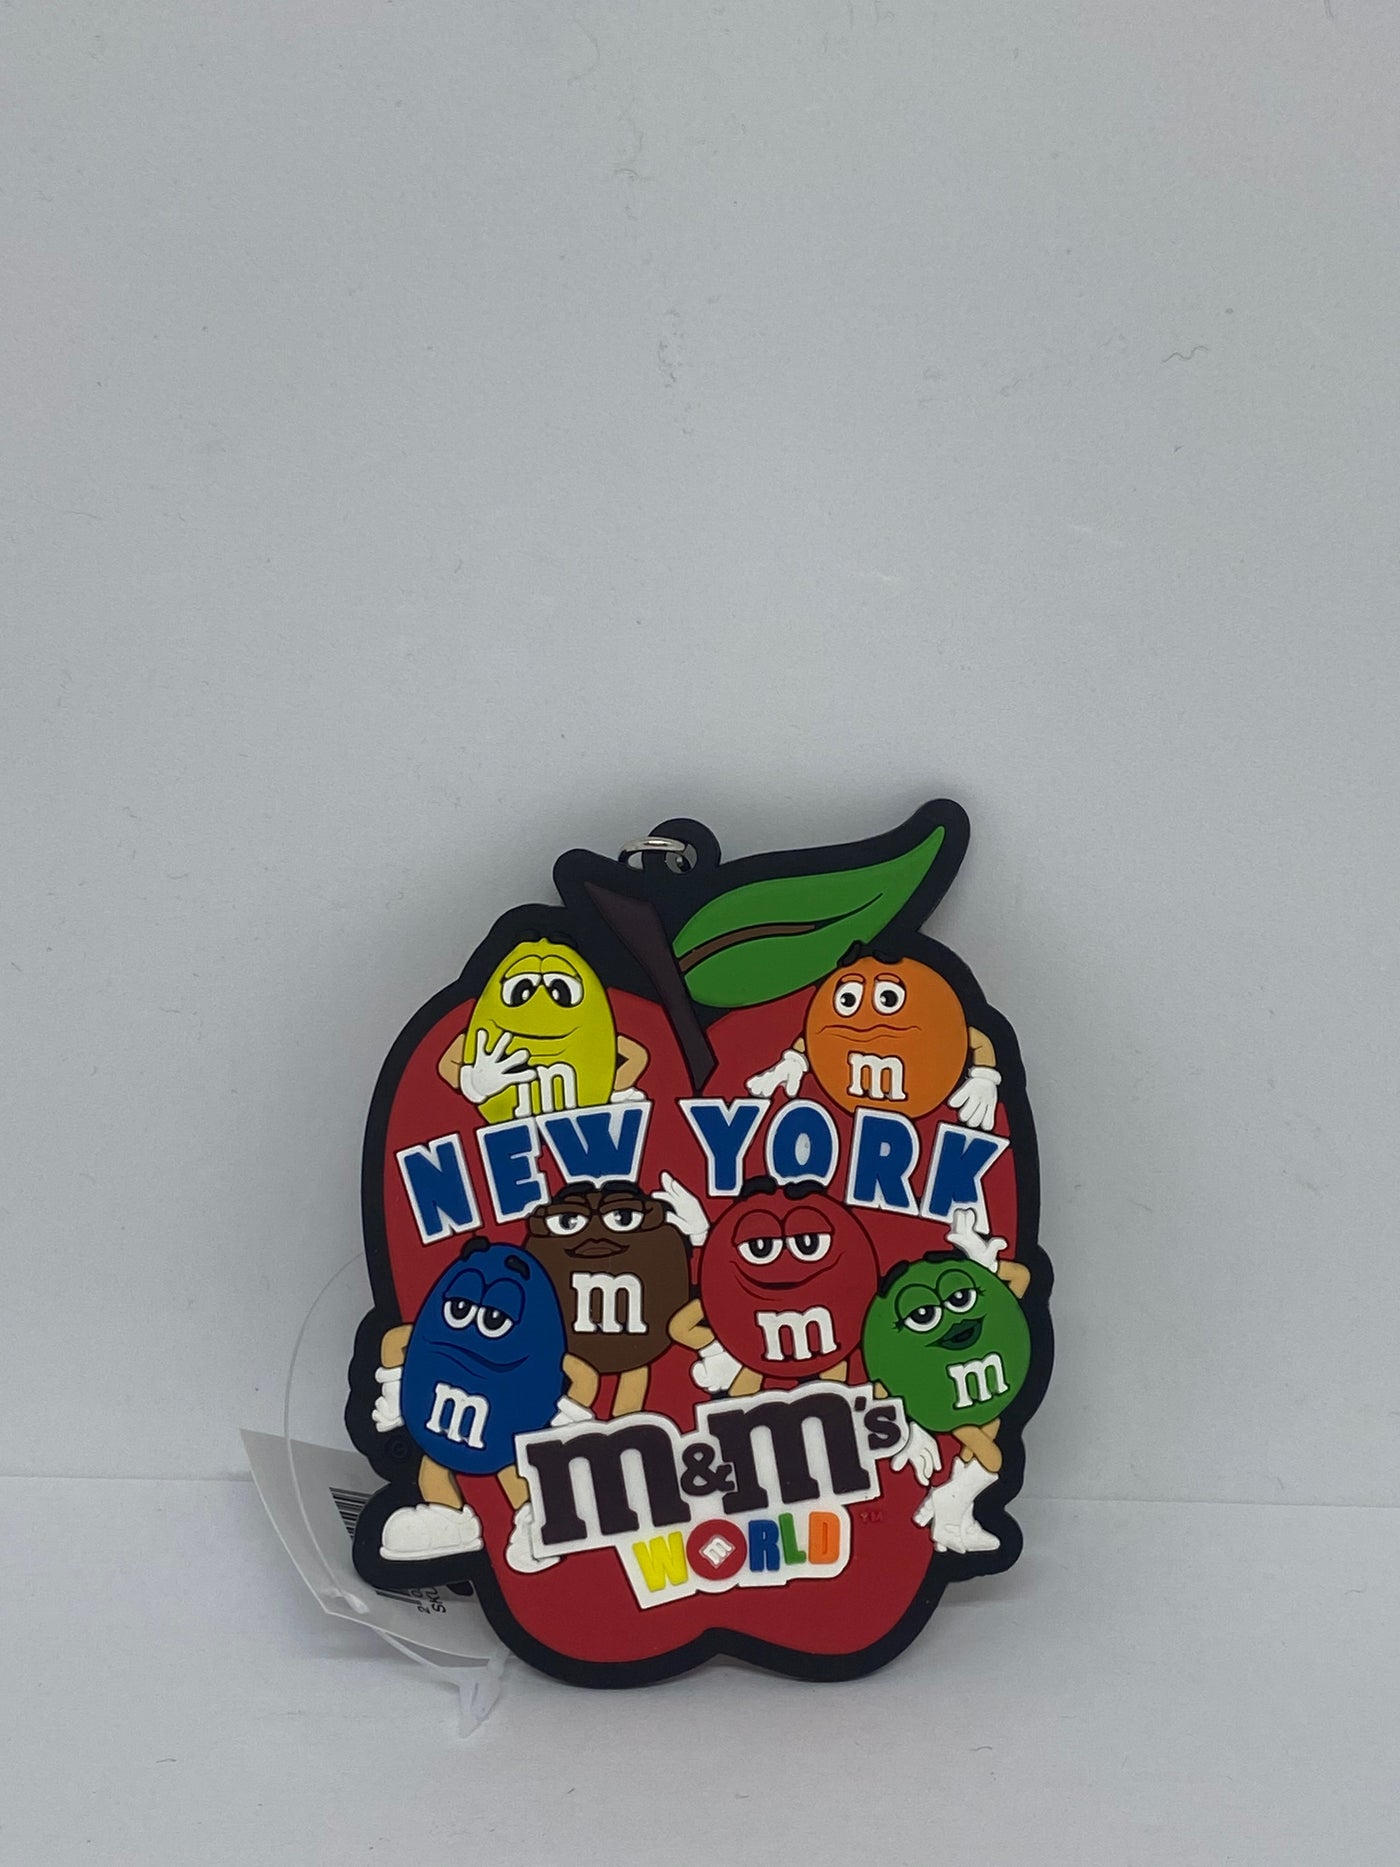 M&M's World Characters New York Big Apple Keychain New with Tags